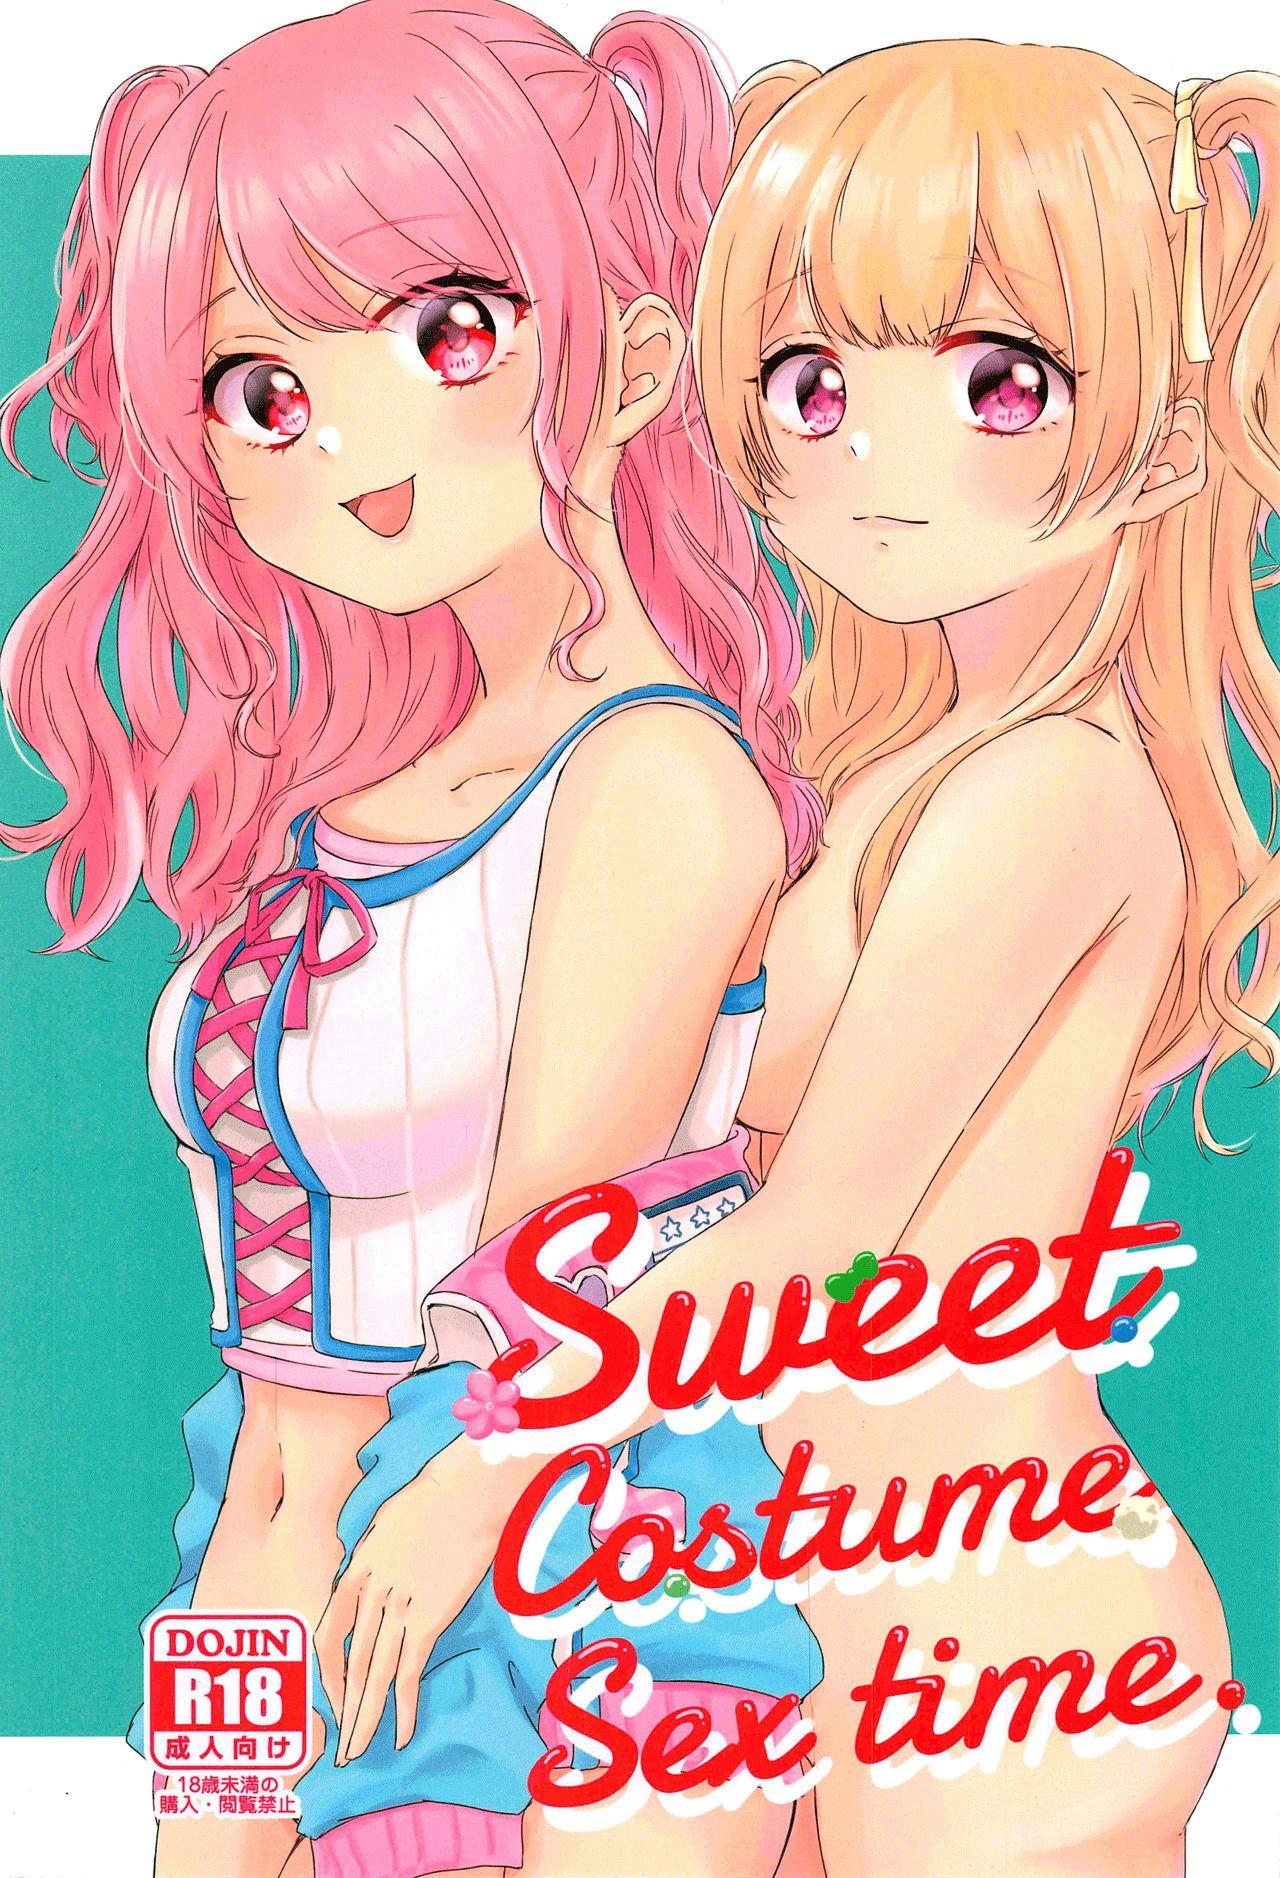 Milf Sweet Costume Sex time. - Bang dream Pussy Sex - Page 2